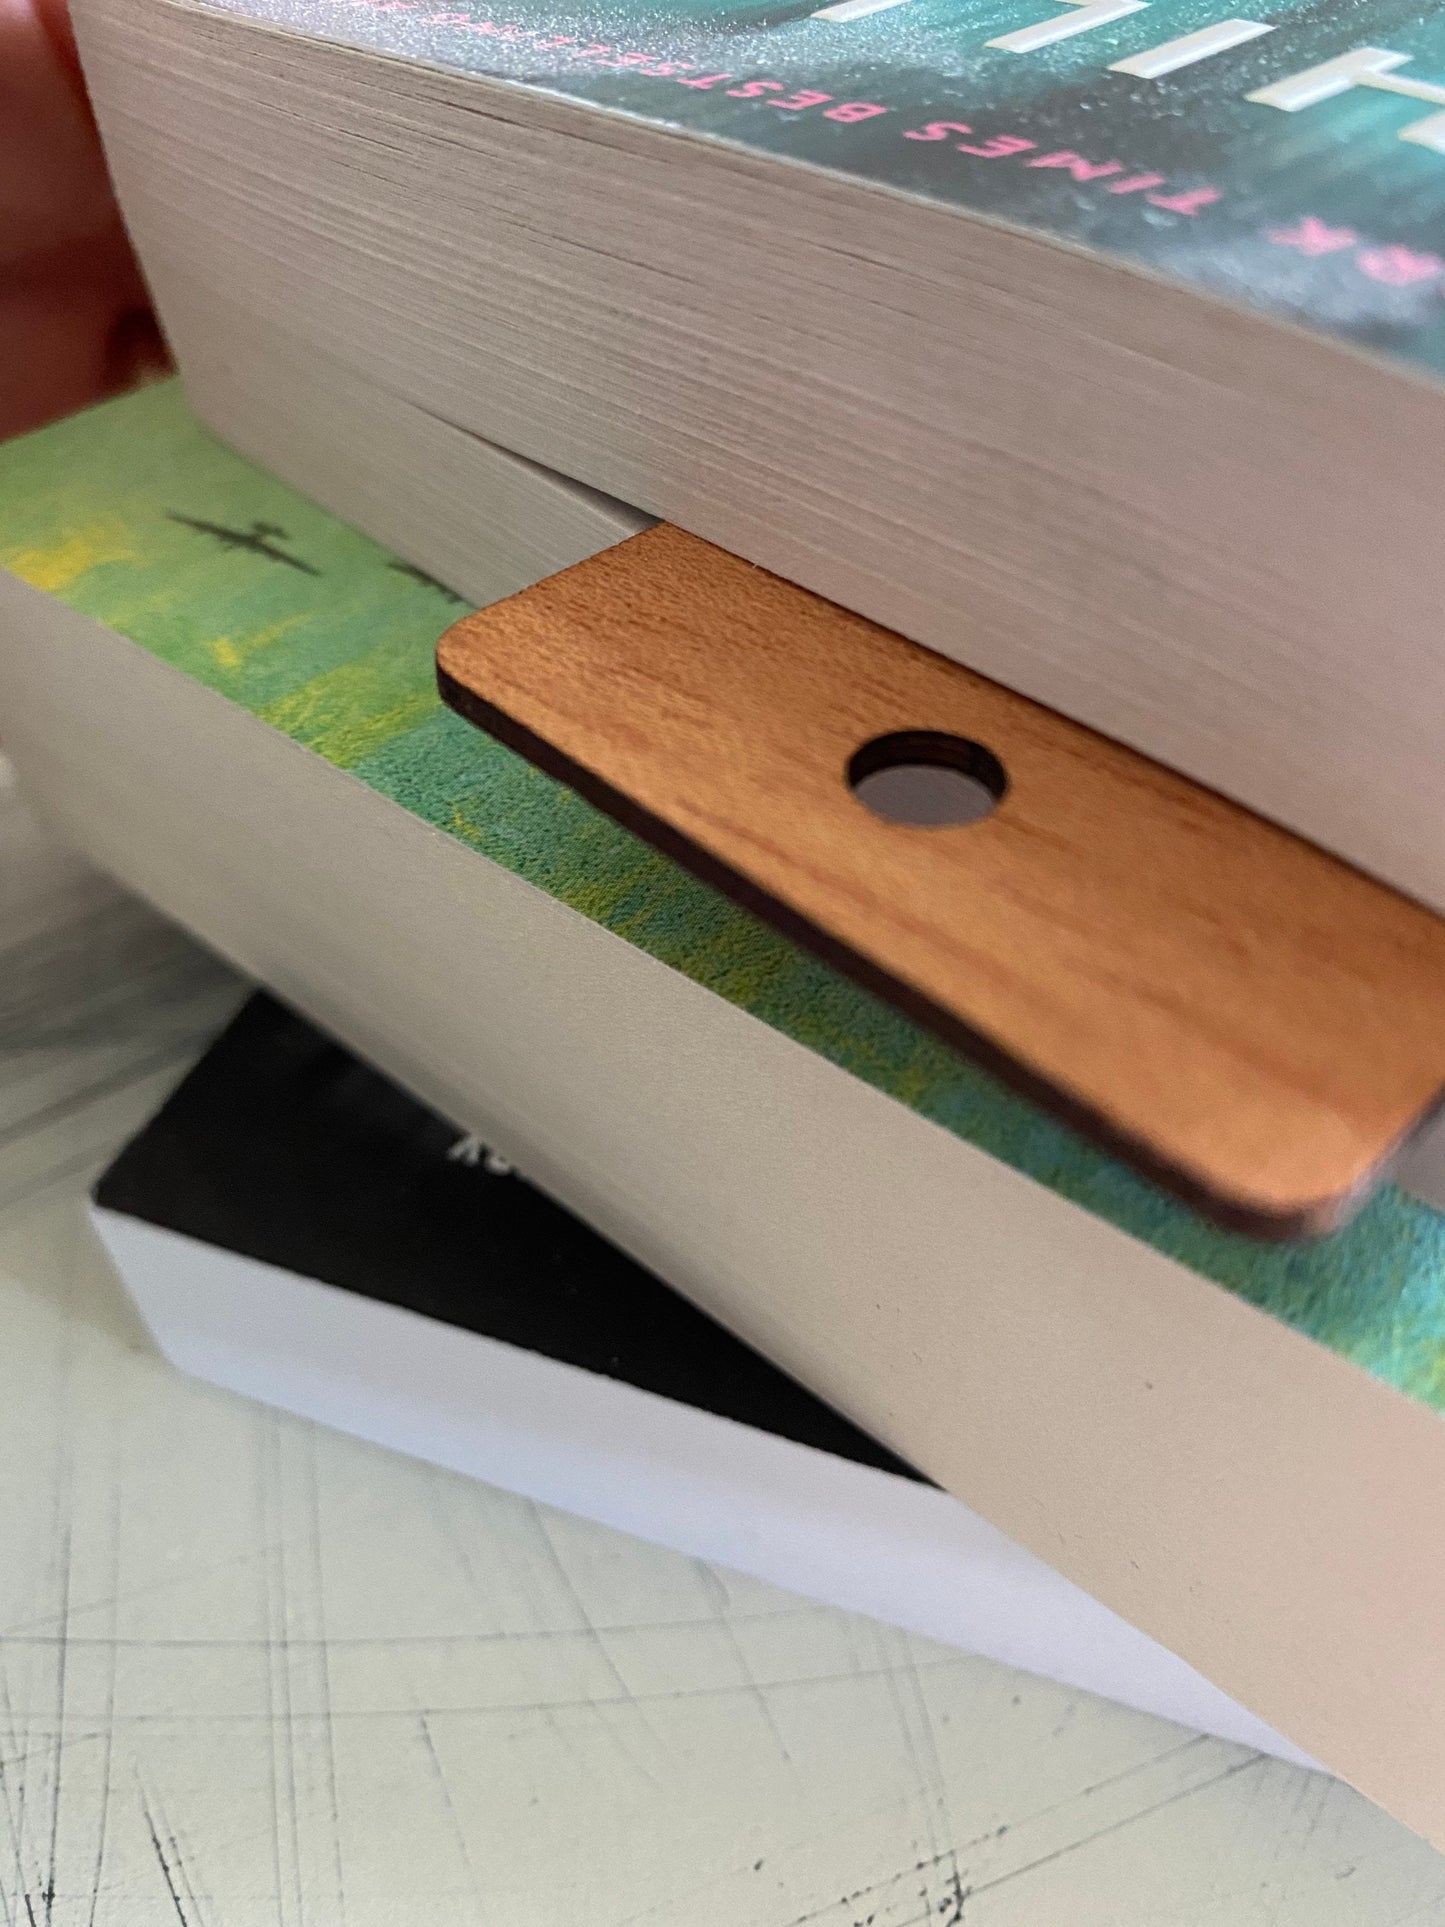 I plan on popping a pill, crying a bit, and falling asleep early - wood bookmark